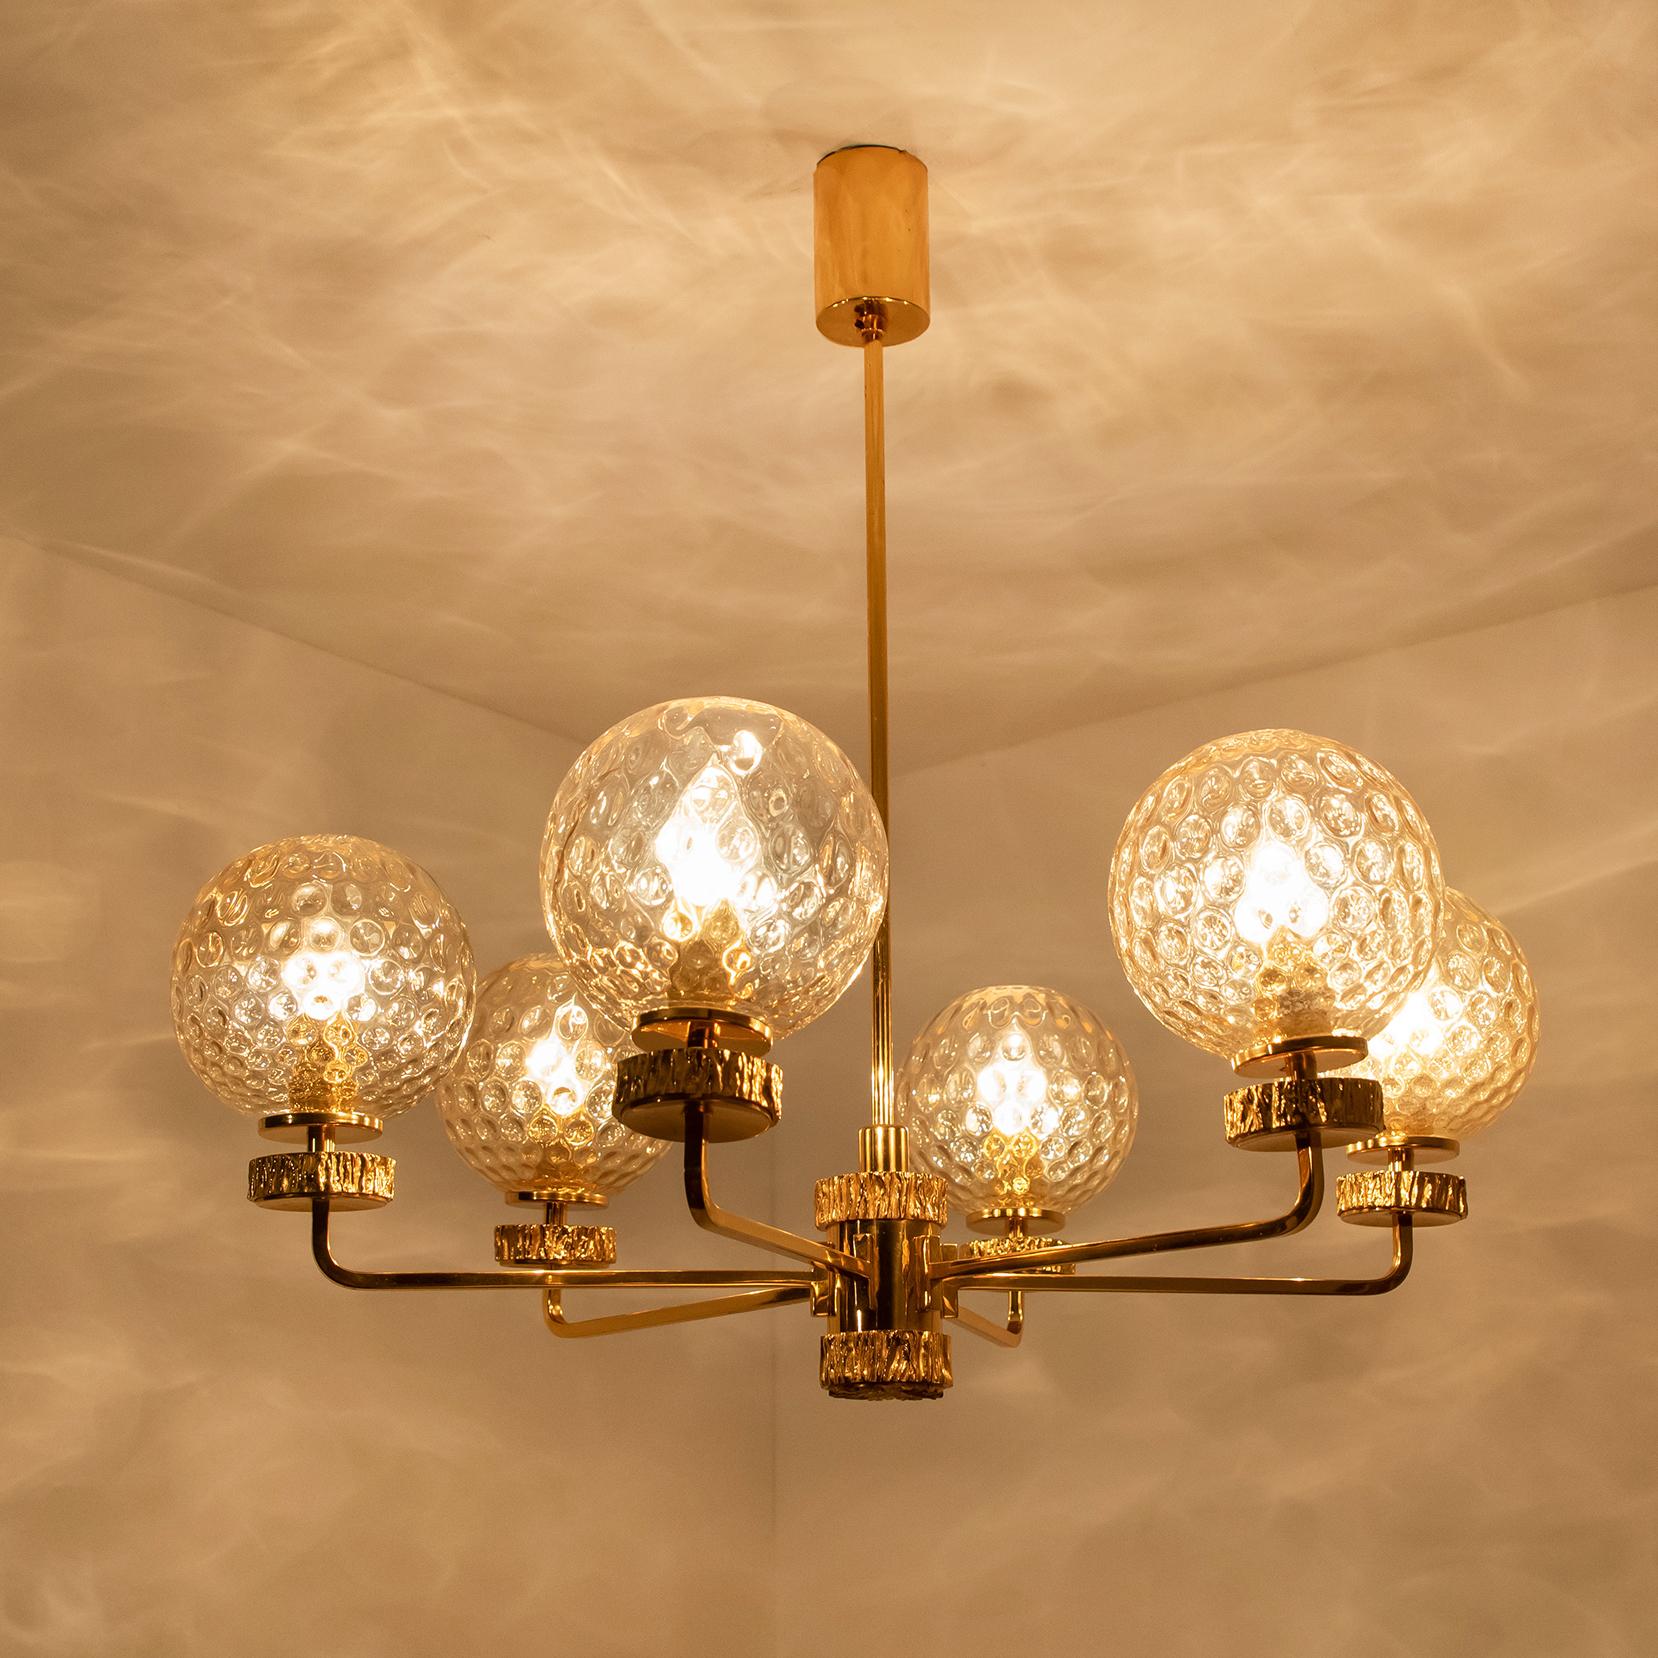 This stunning set light fixtures with textured glass bowls and gold-plated fittings was produced in the 1970s in the style of Brotto. Illuminates beautifully. Elegant and fine, it is comfortable with all decor periods.

This chandelier is large